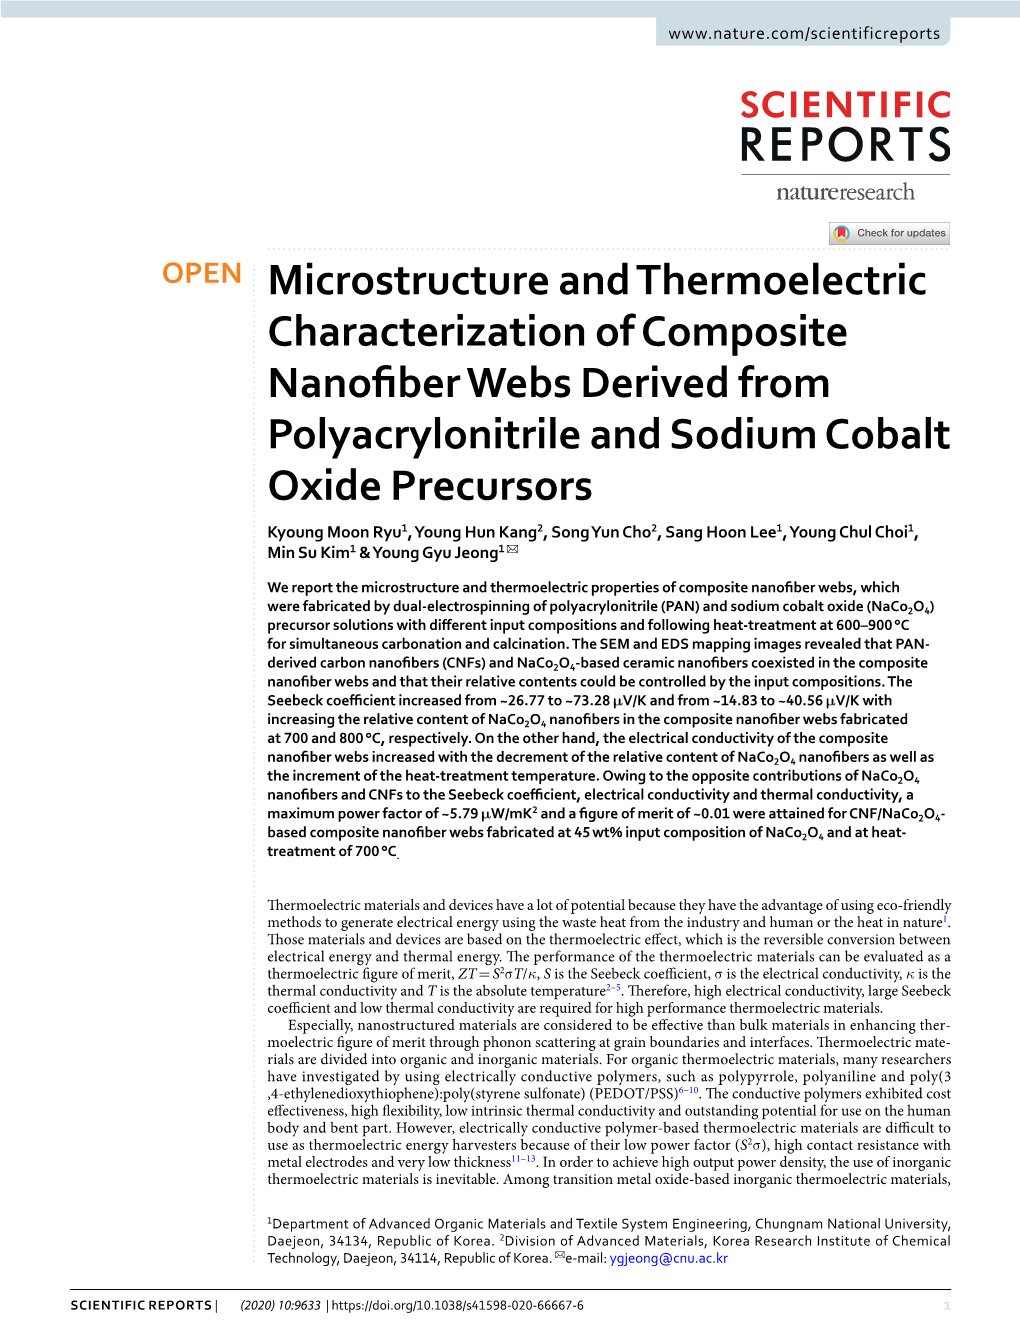 Microstructure and Thermoelectric Characterization of Composite